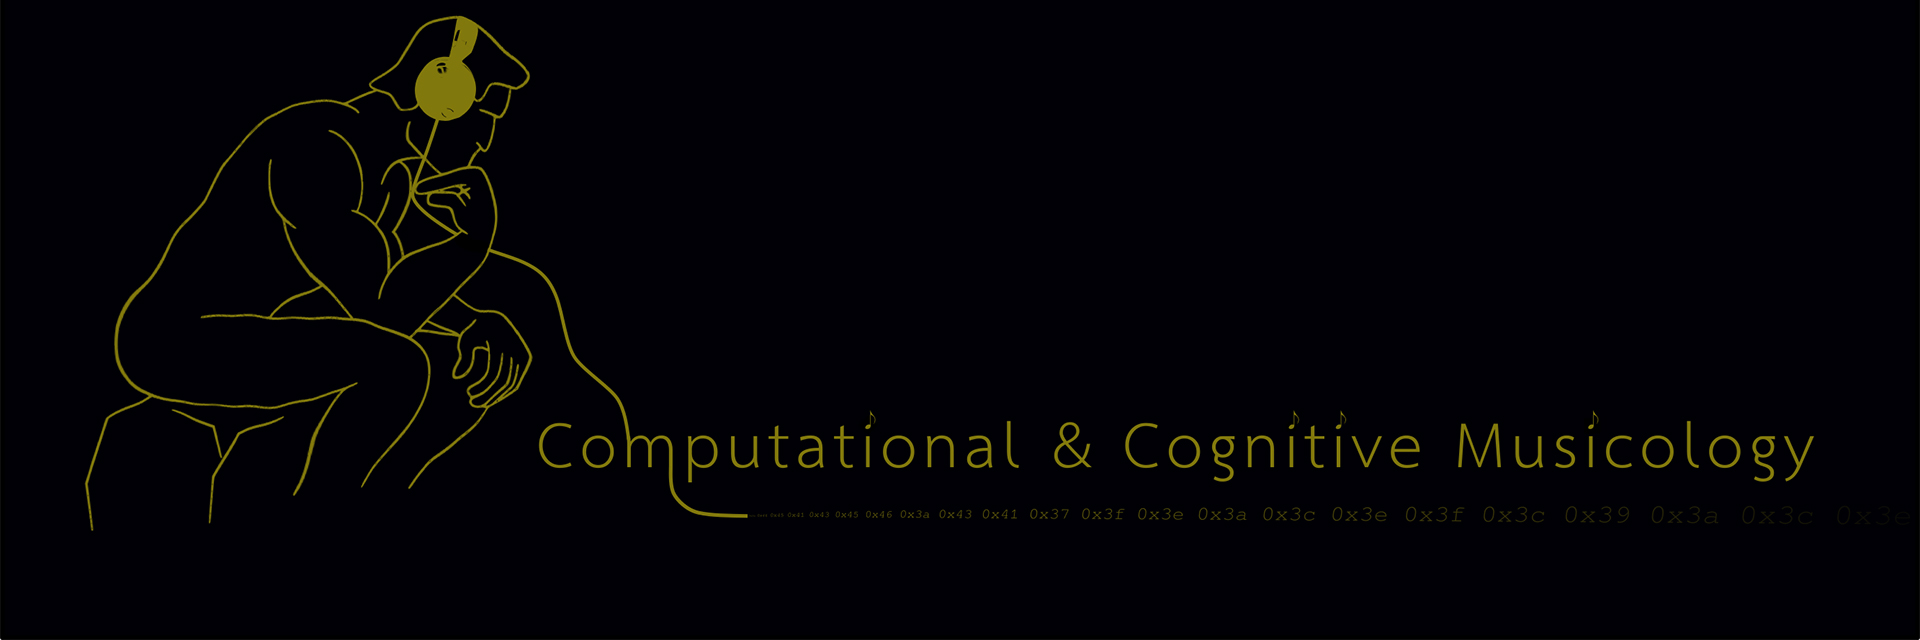 The Computational and Cognitive Musicology logo